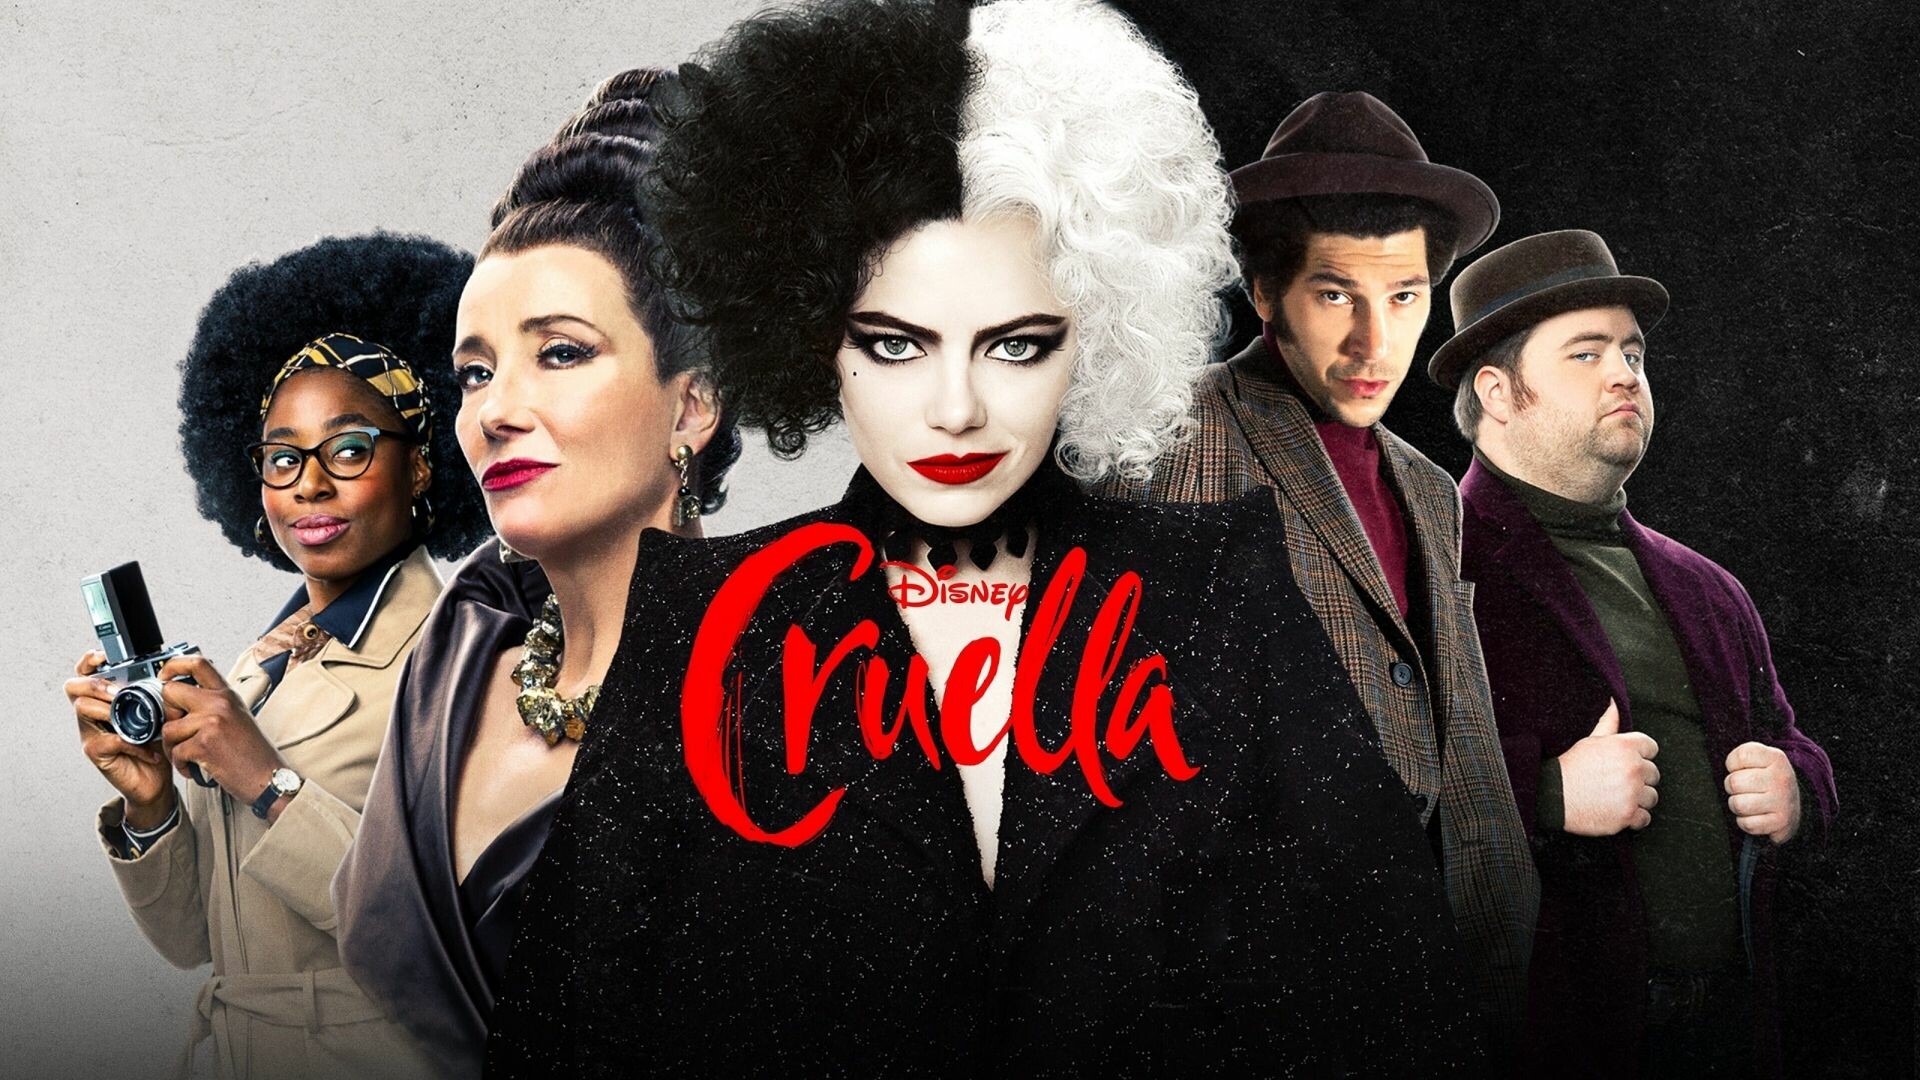 Cruella (2021): Emma Thompson, who has previously worked with Disney on Treasure Planet, Brave, Saving Mr. Banks, and the Beauty and the Beast remake, co-stars along with Mark Strong. 1920x1080 Full HD Background.